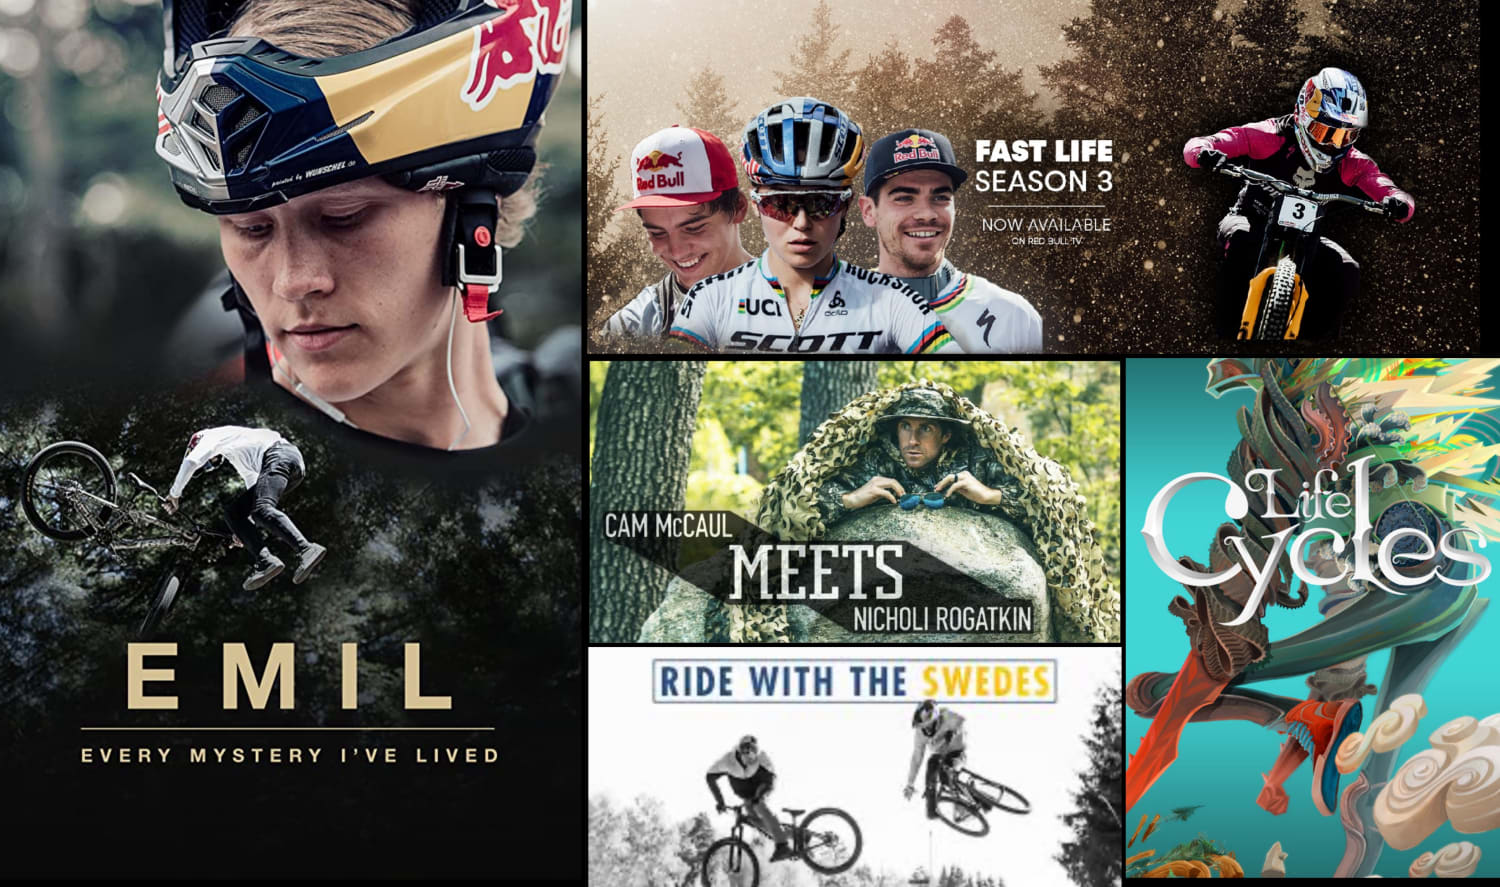 lade USA Etna Must-watch bike movies on Red Bull TV